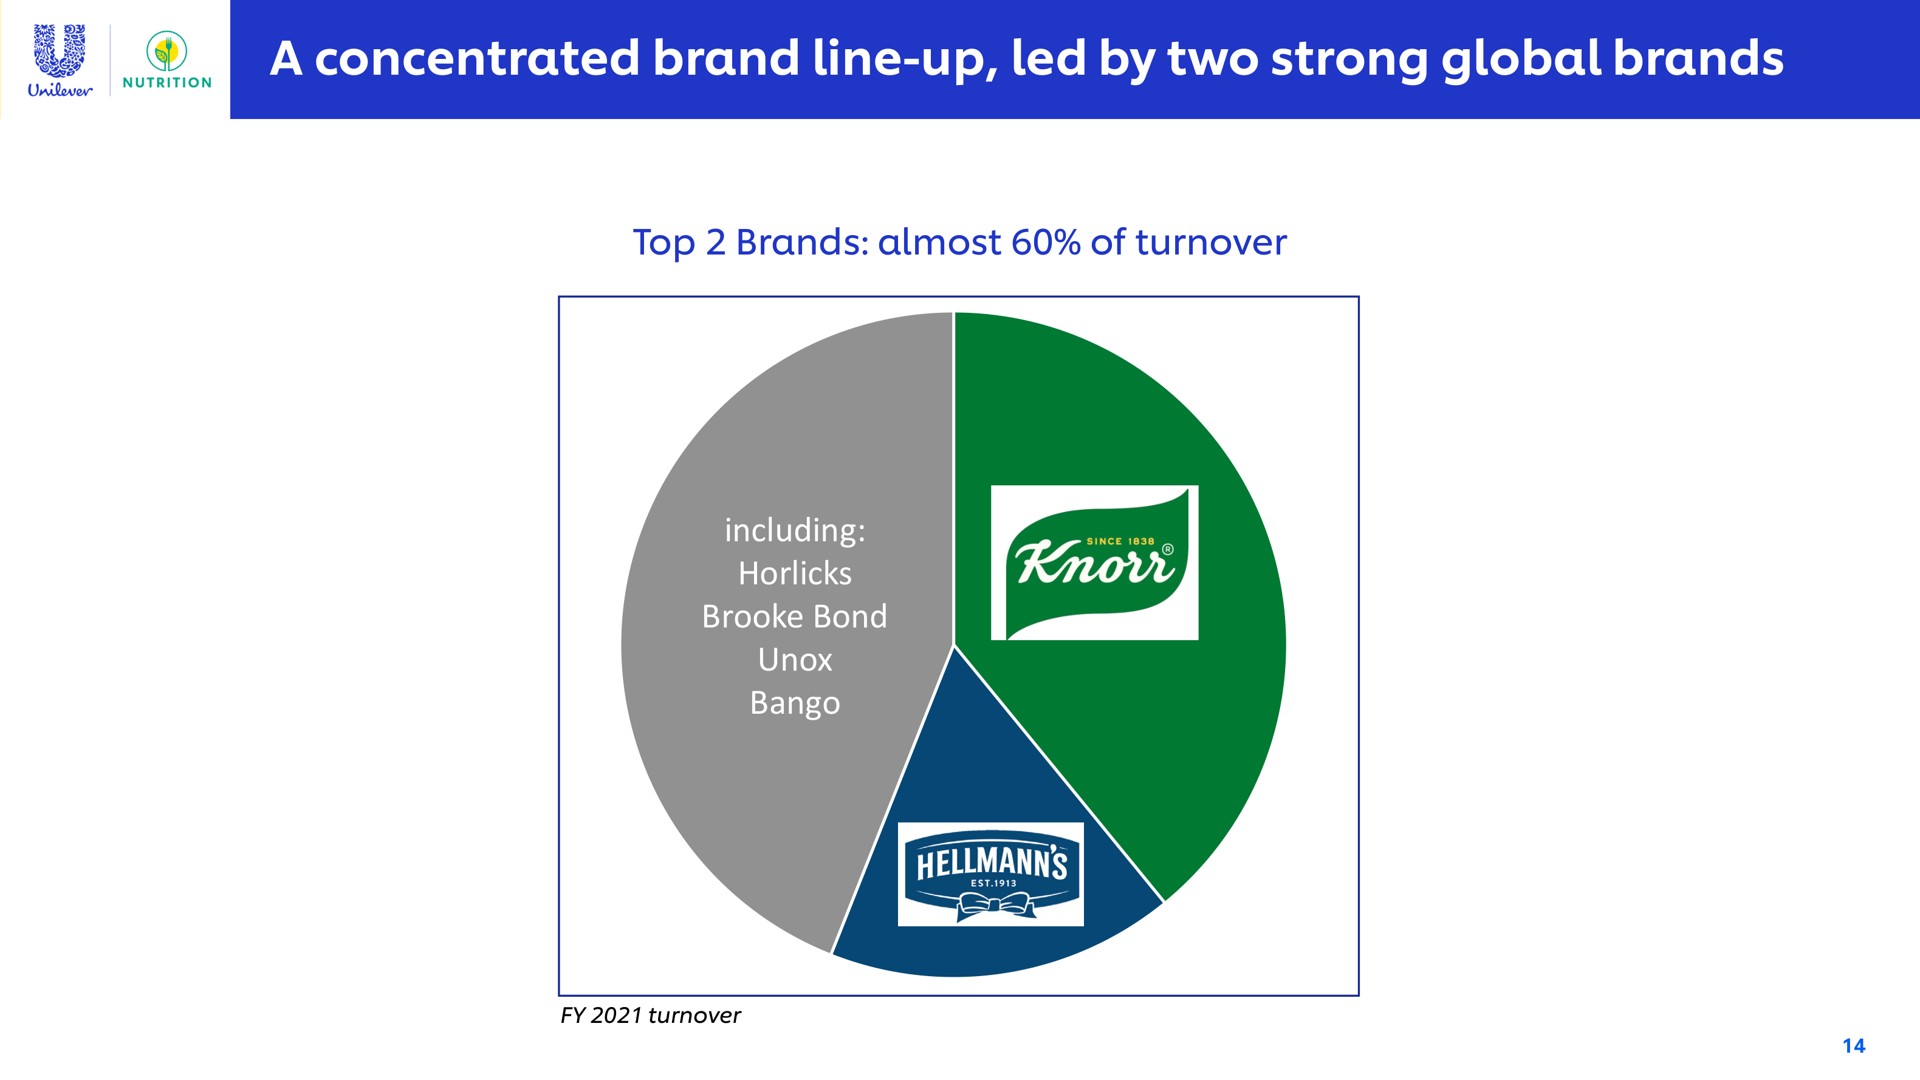 a concentrated brand line up led by two strong global brands | Unilever